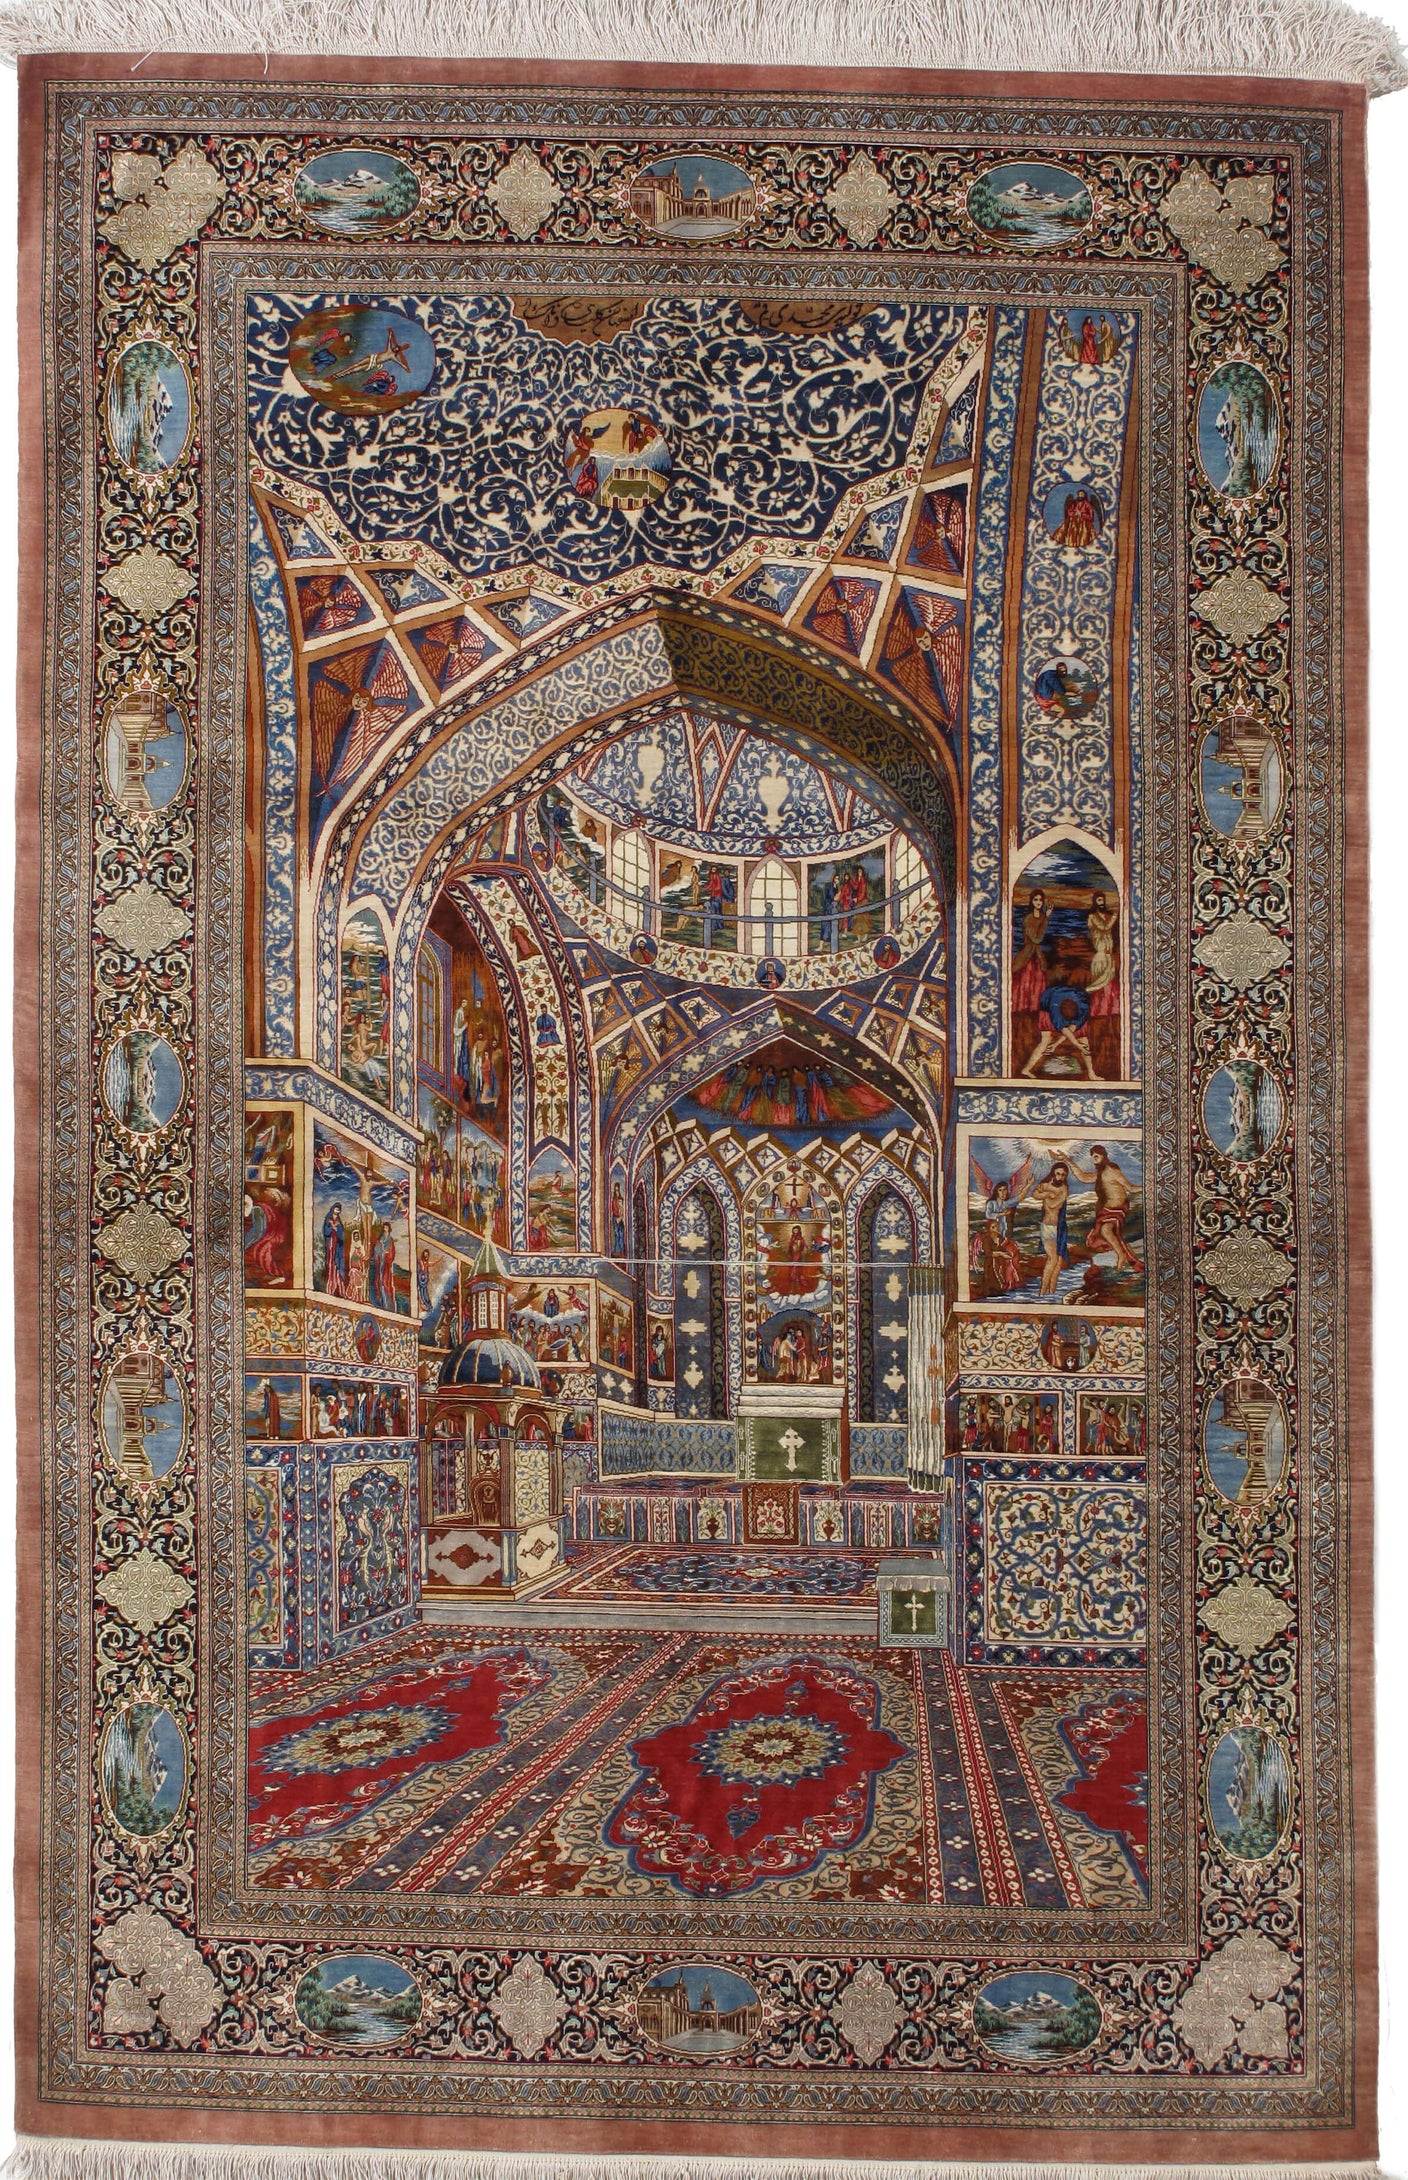 Silk masterpiece was handwoven during the late 20th century at the Mohammedi atelier in Qum, Iran. Vank Cathedral was established in 1606 following the forced relocation of nearly 500,000 Armenians to Isfahan by Shah Abbas during the Persian-Ottoman war. cacophony of colors. Mount Ararat (Մասիս) resting place of Noah's Ark. Woven by Mohammedi of Qum for Vank Church of Isfahan. Mohammedi is a renowned master weaver.